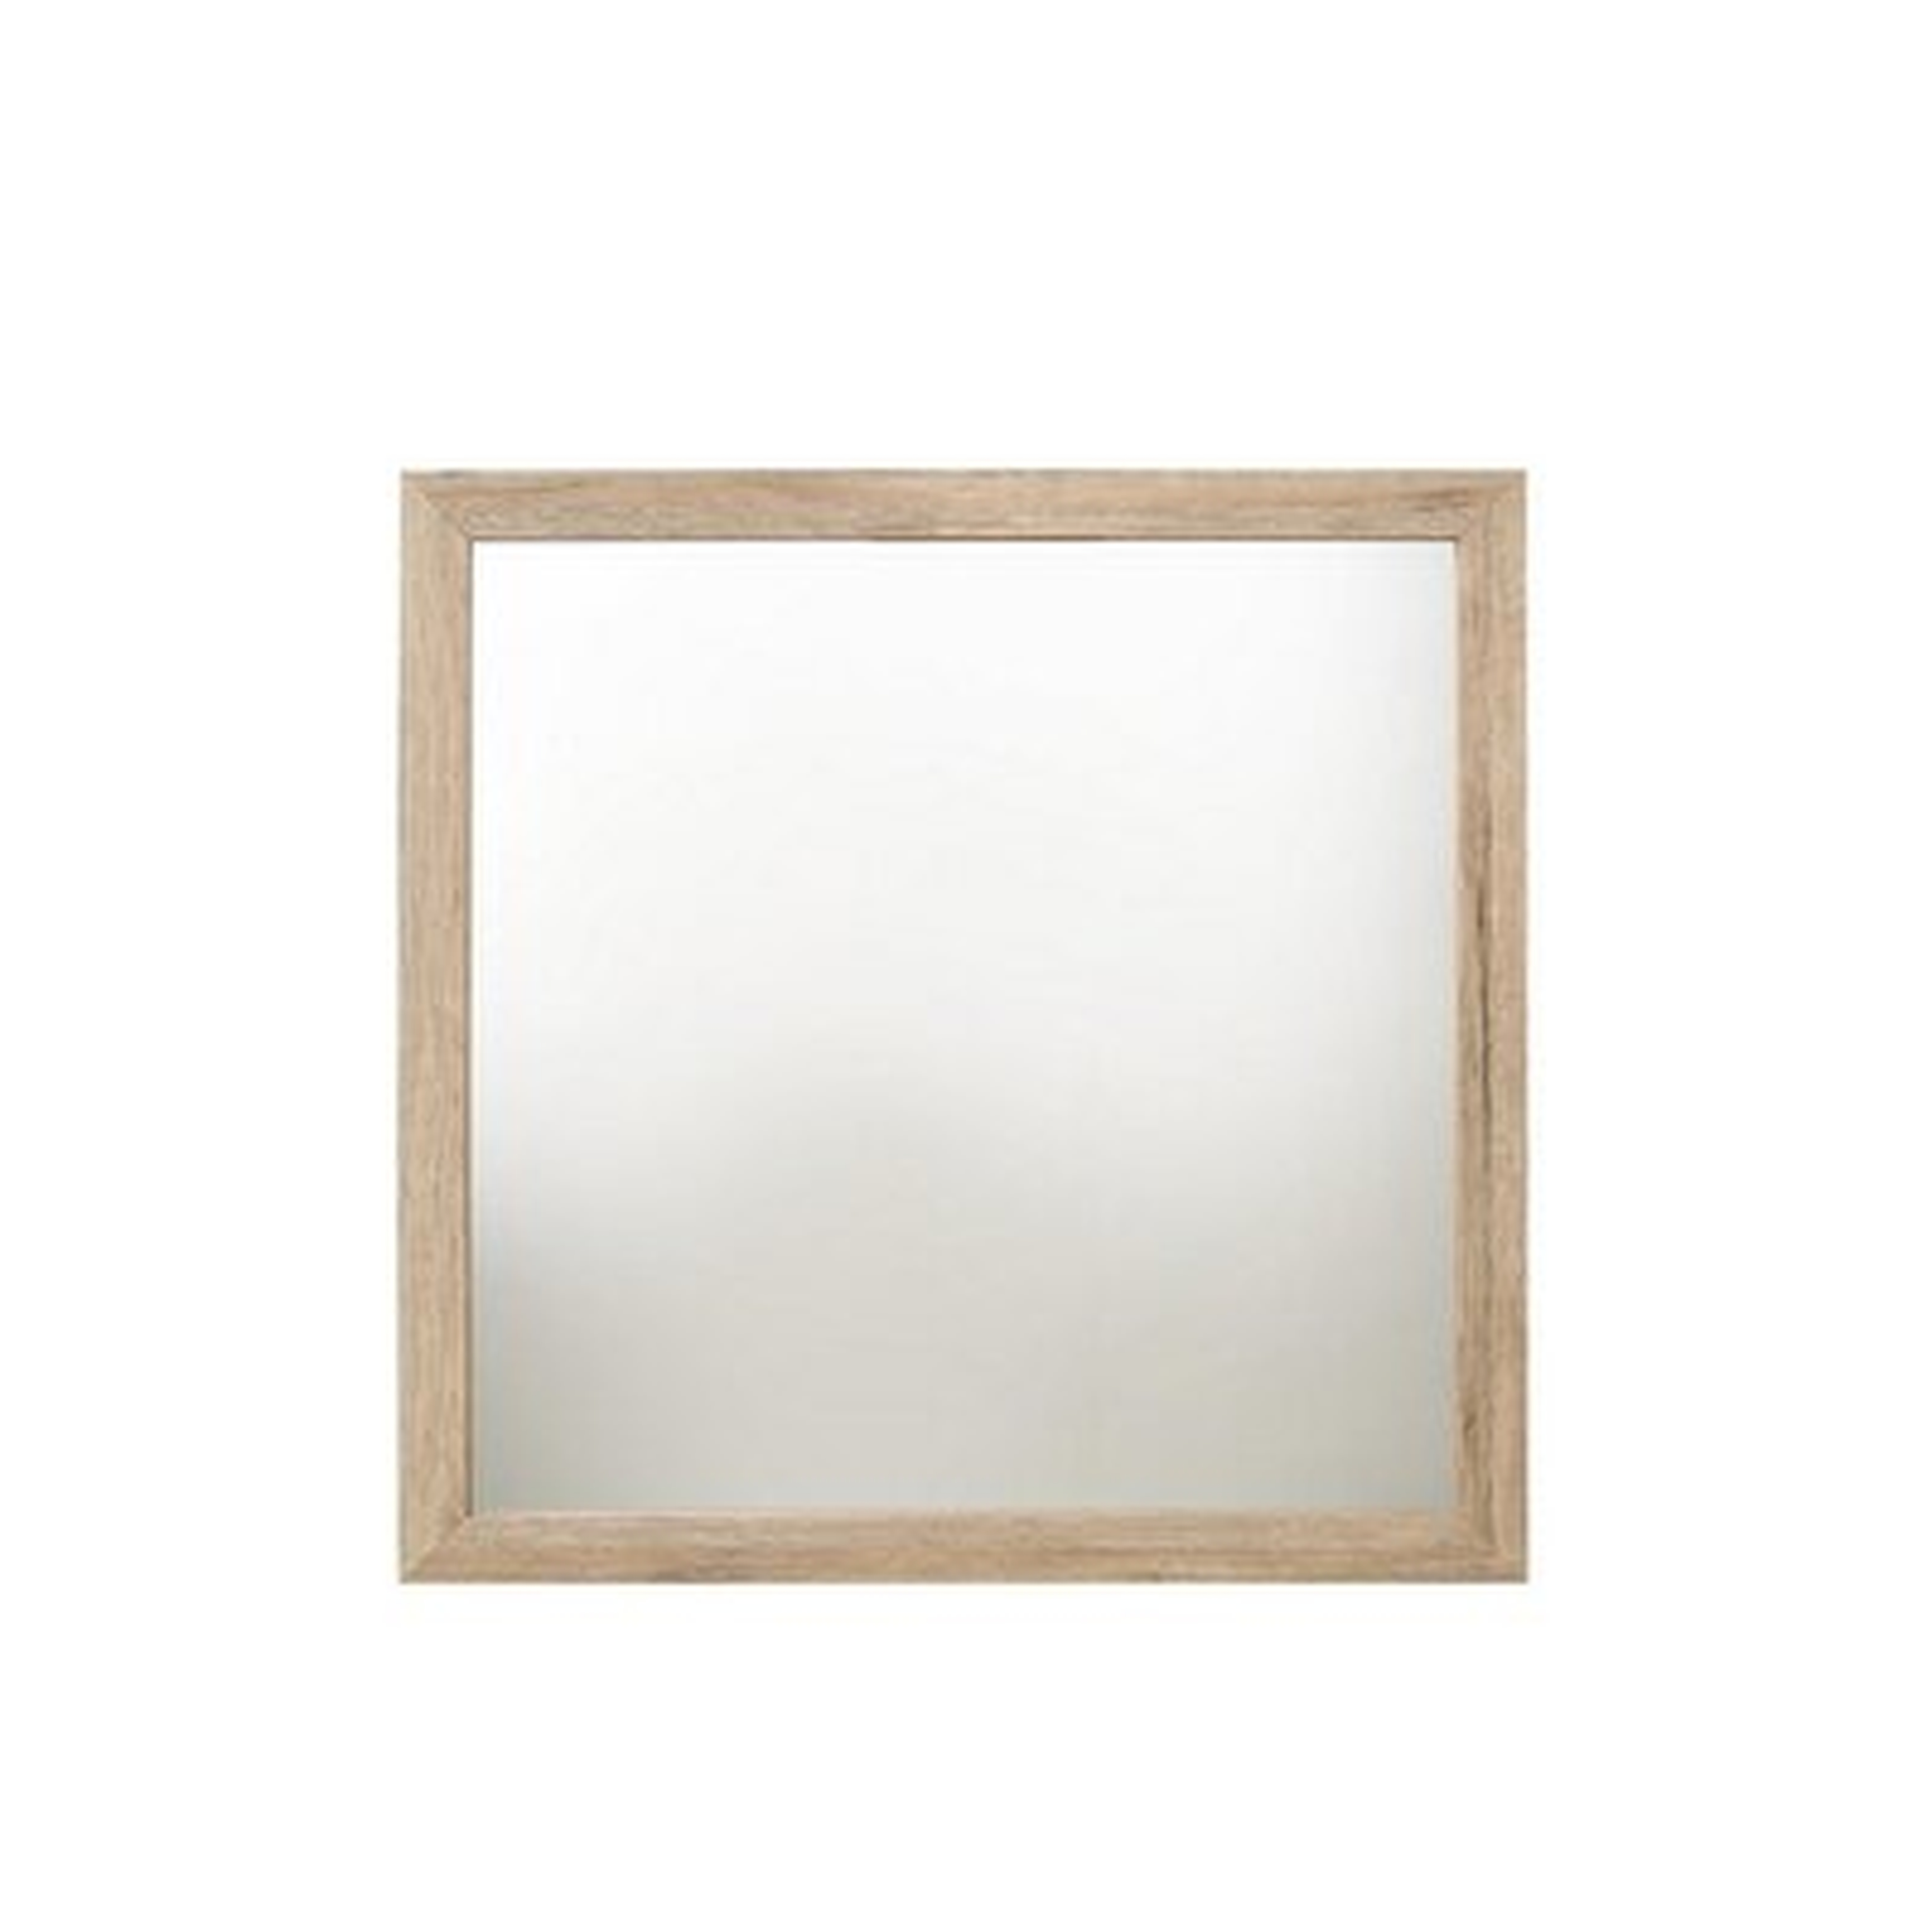 Square Shaped Wooden Mirror With Rough Hewn Texture, Brown - Wayfair